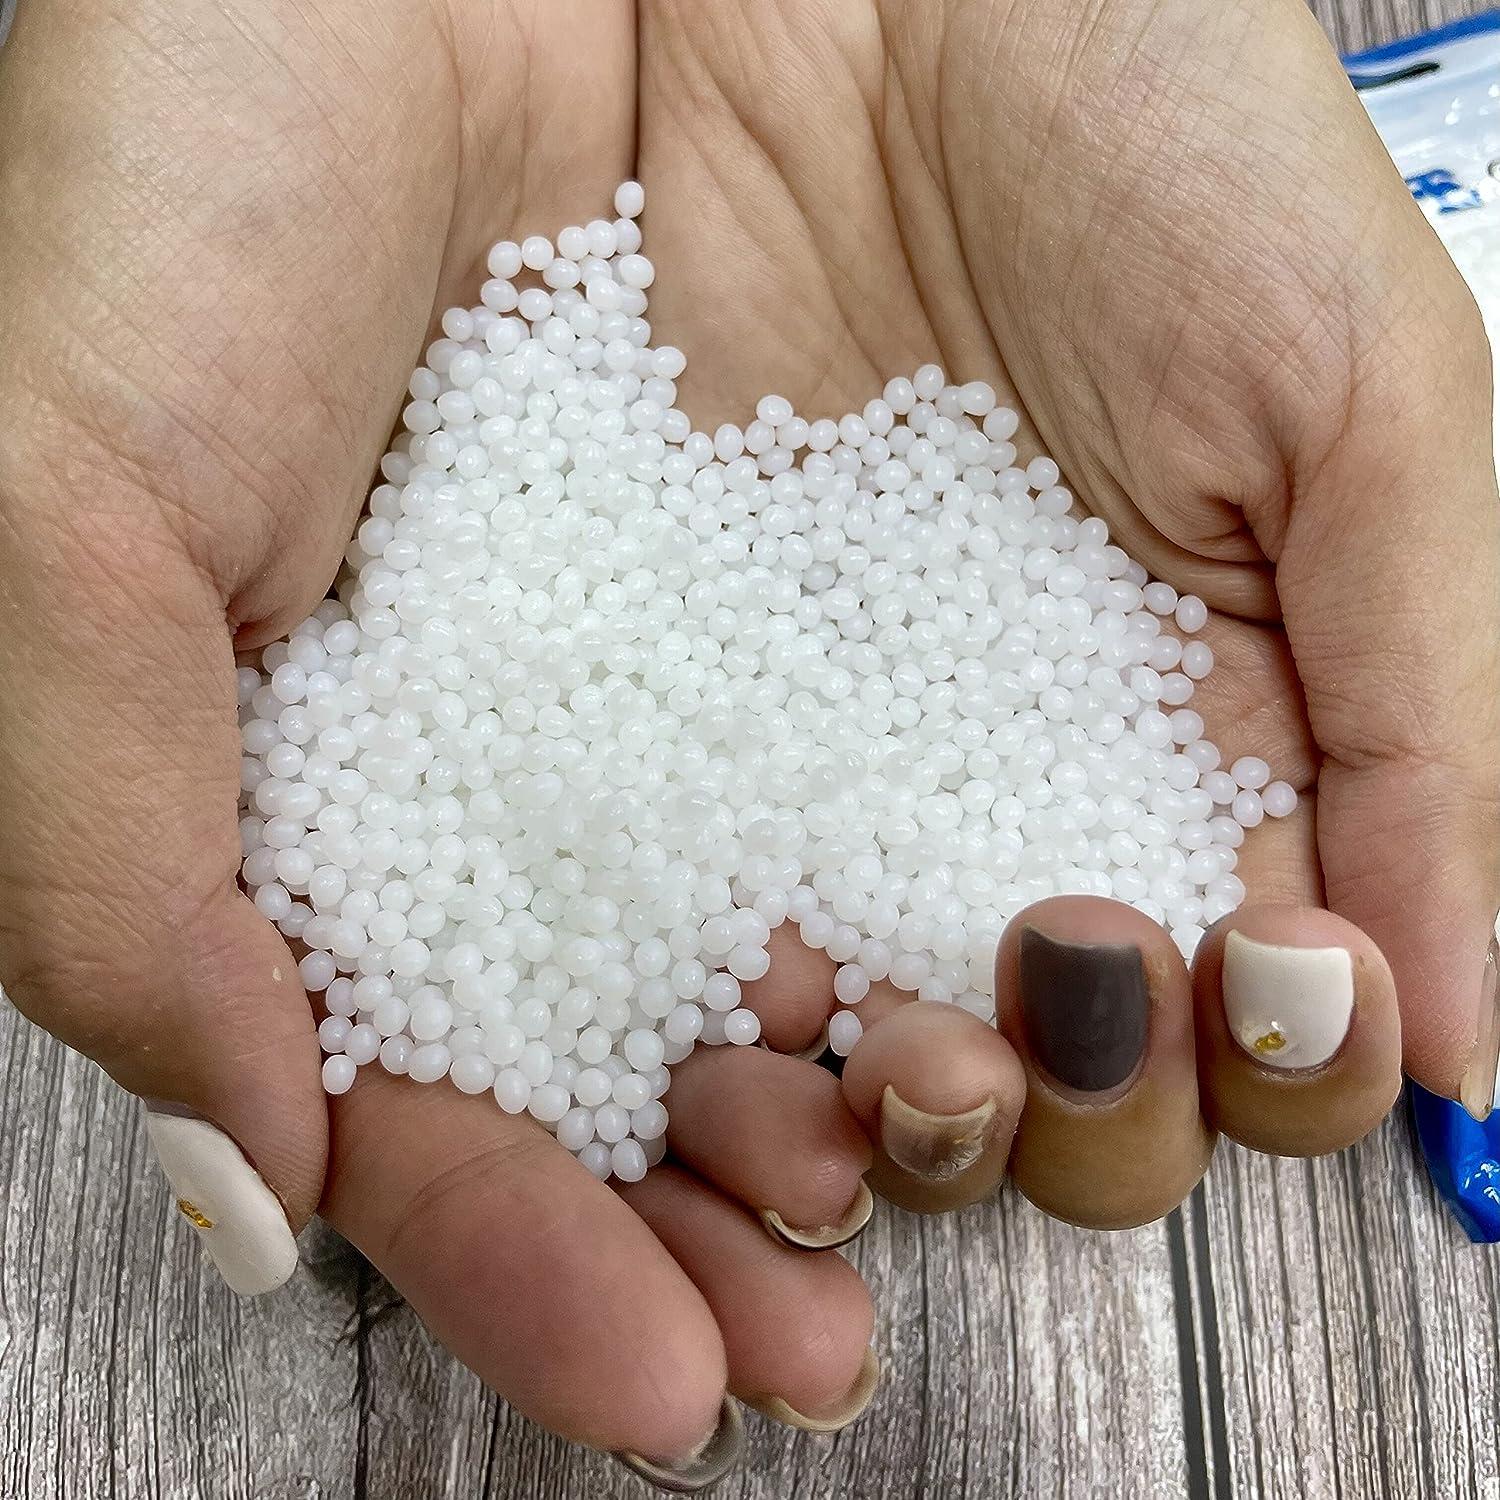 Thermoplastic Moldable Plastic Thermoplastic Pellets Thermoplastic Beads  Crafts